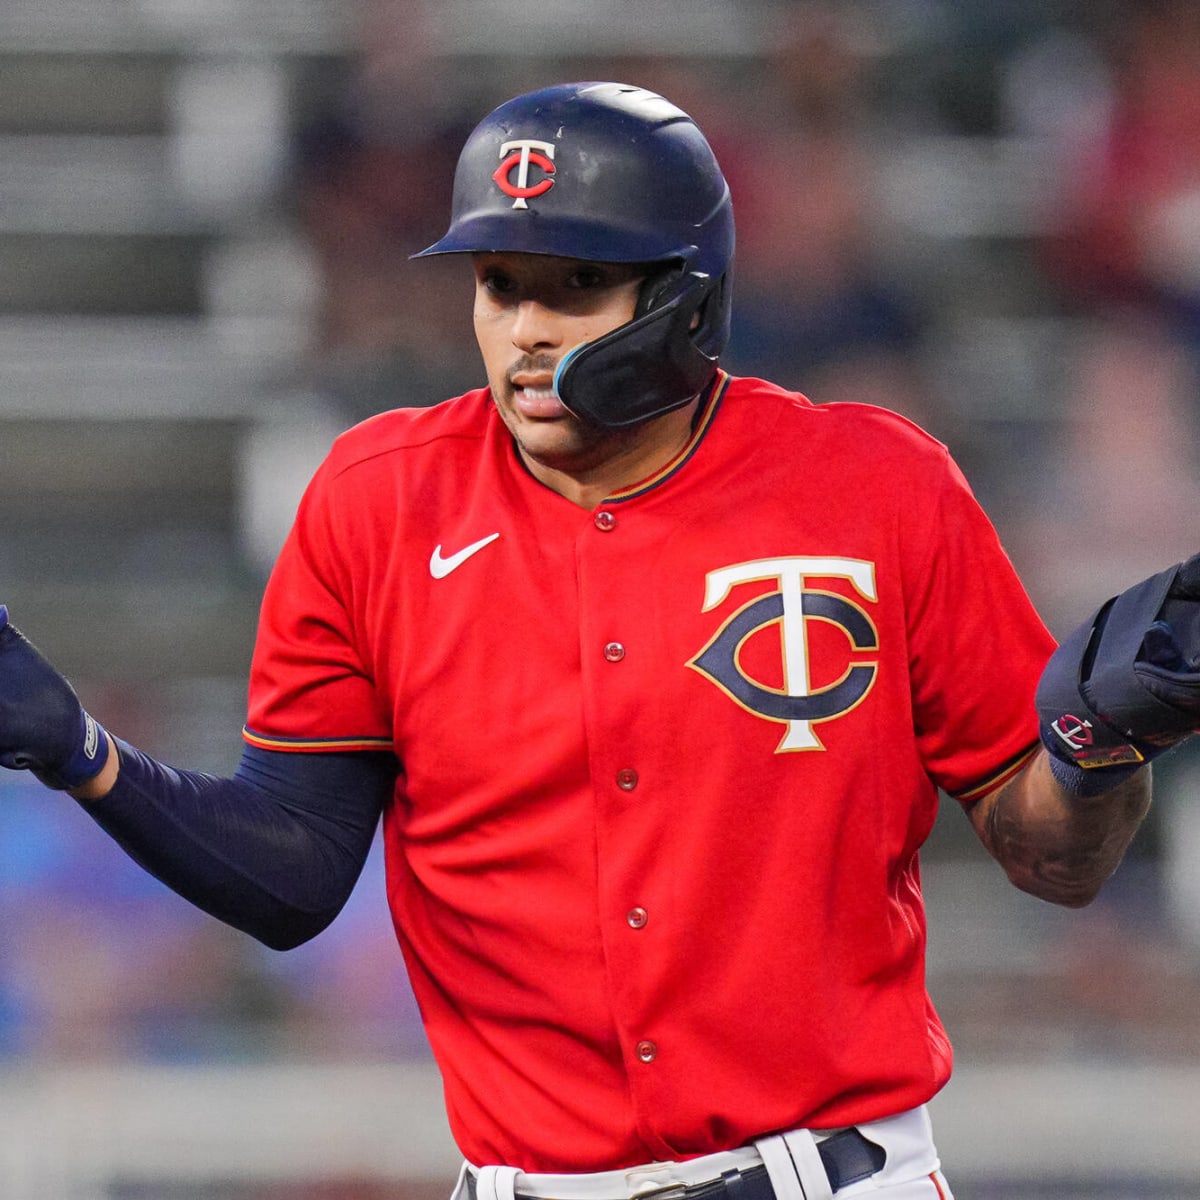 The Correa Saga: Have the Twins Gone From Also-Rans to Contenders